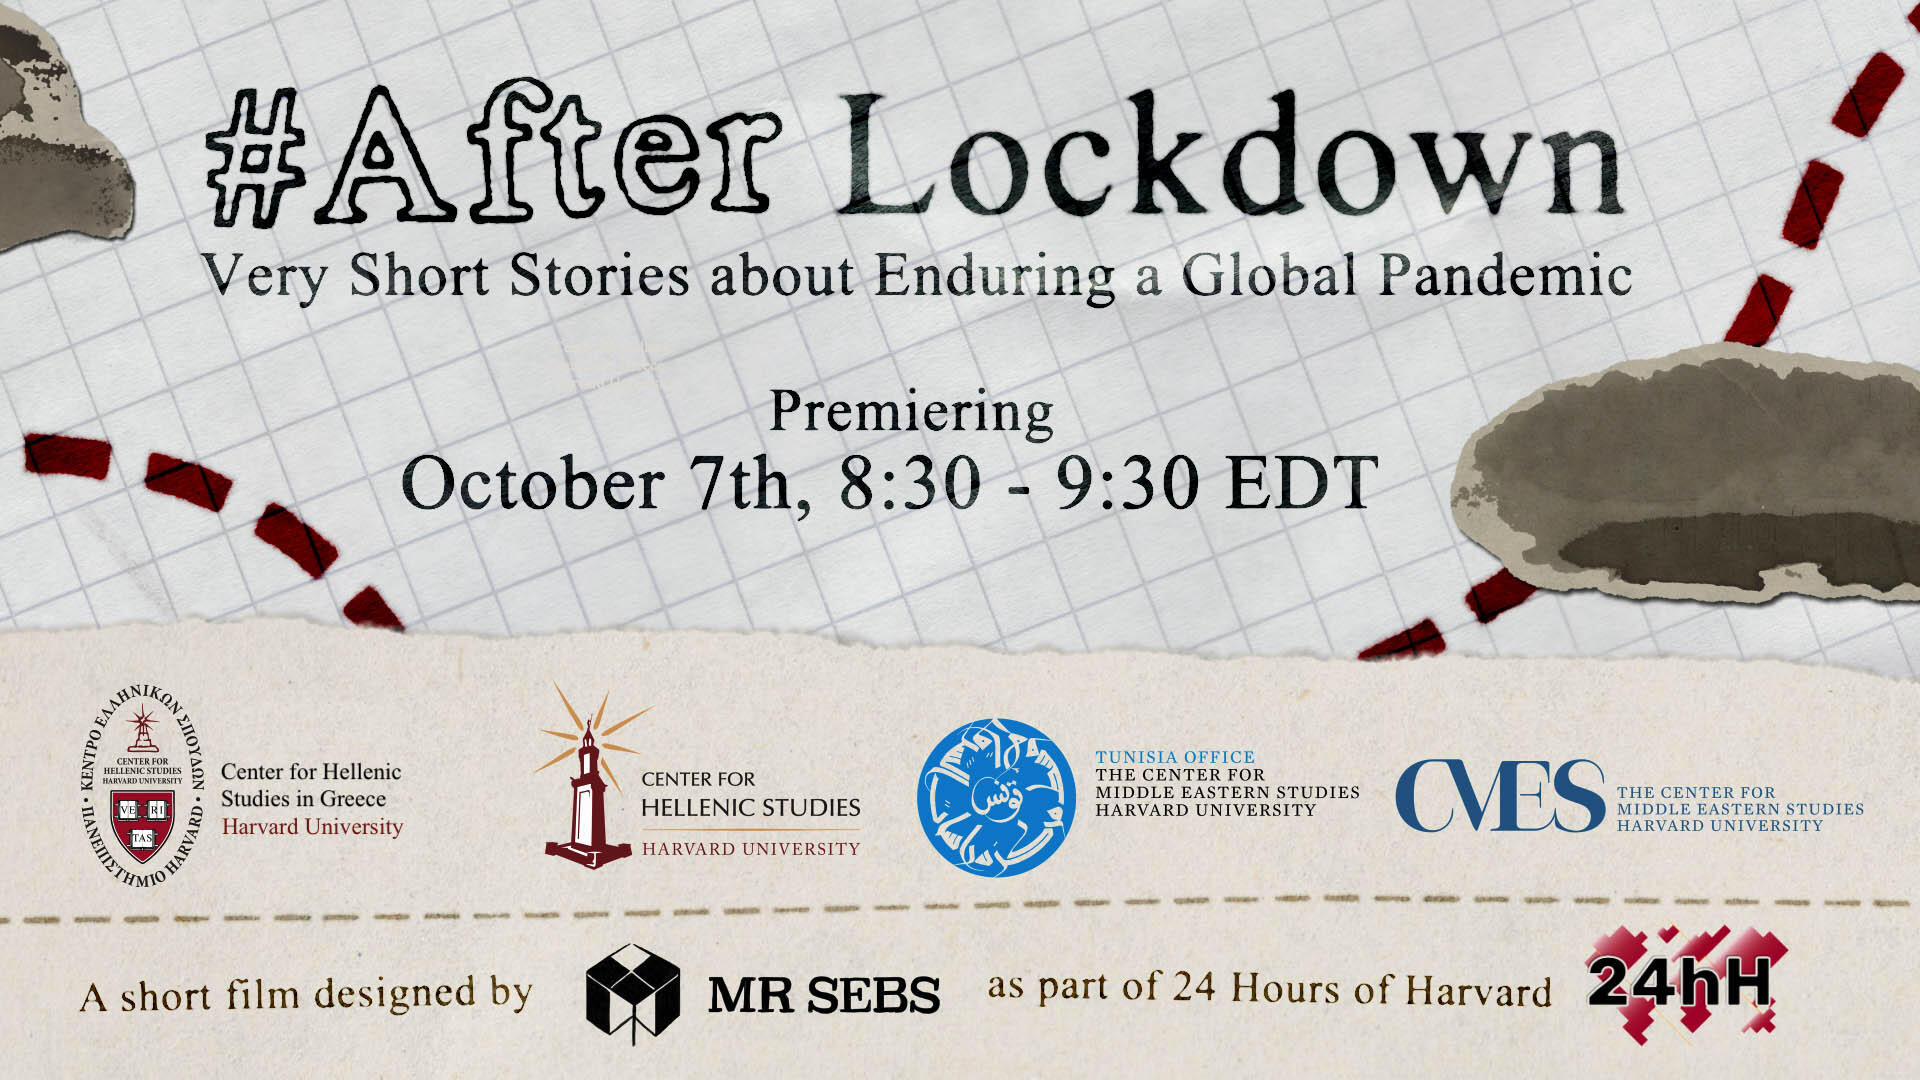 Poster of the After Lockdown film premiere